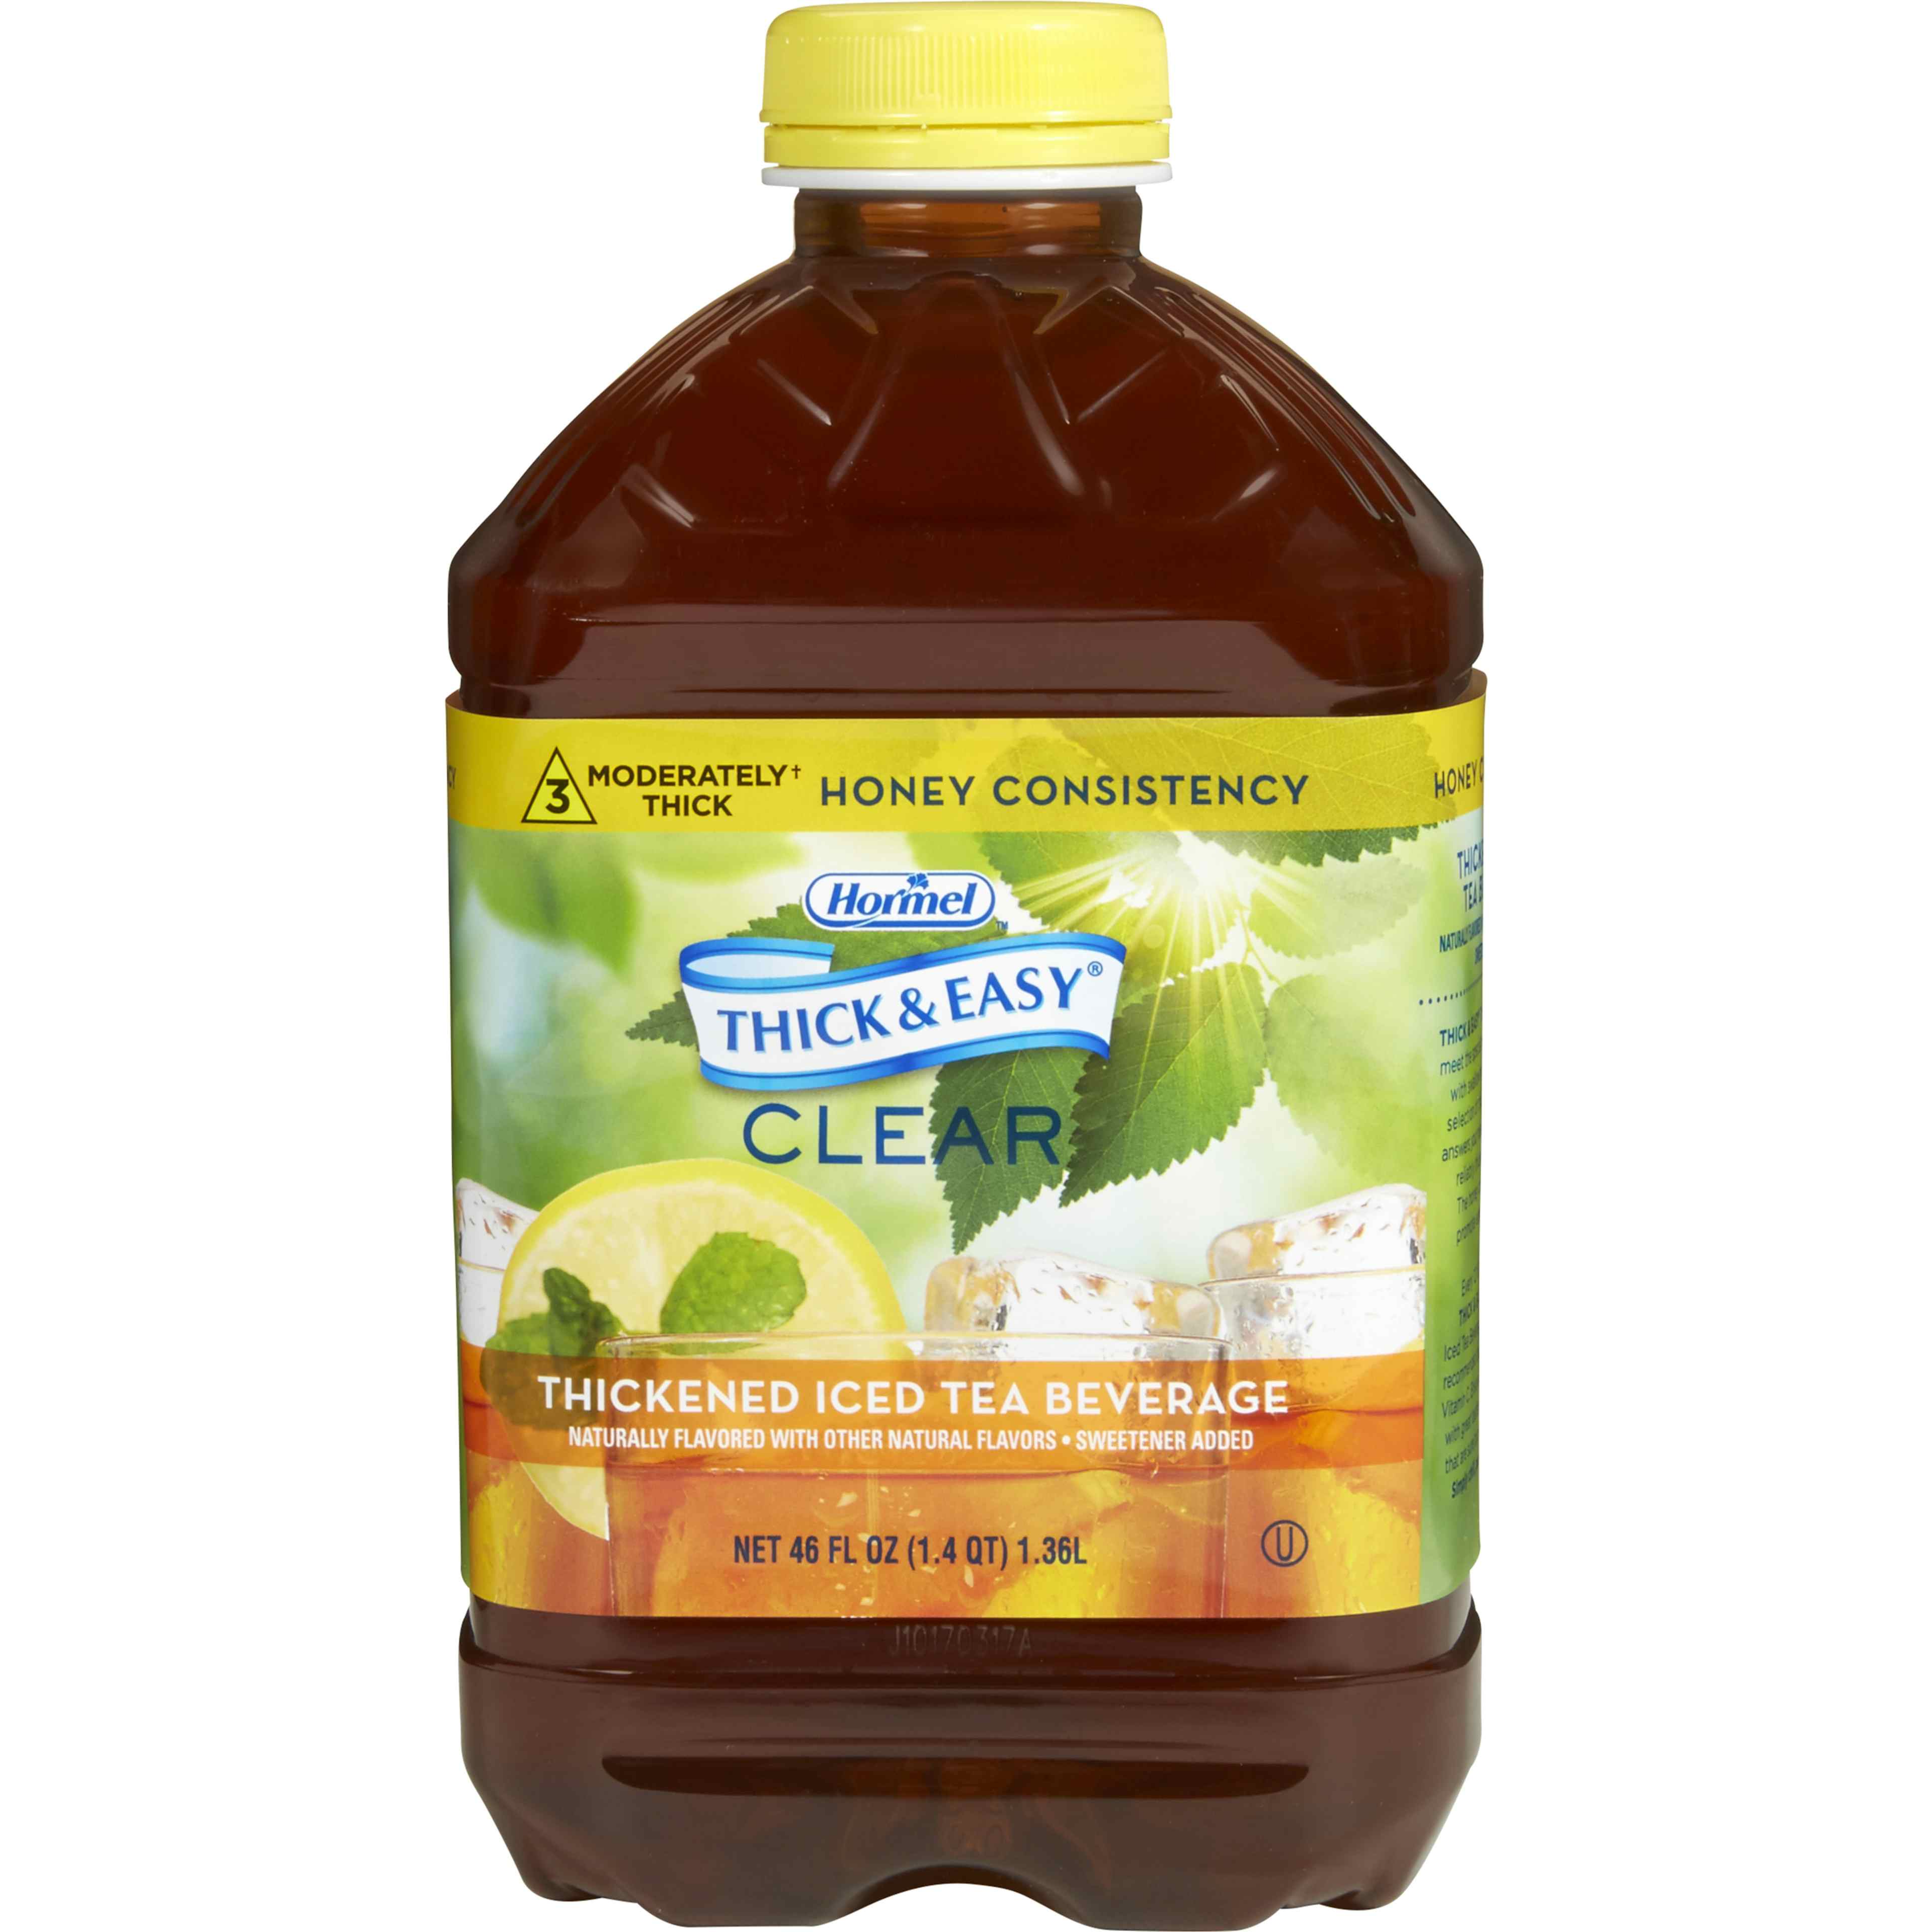 Hormel Thick & Easy Clear Thickened Beverage, Honey Consistency, Moderately Thick, Iced Tea, 46 oz., 45587, Case of 6